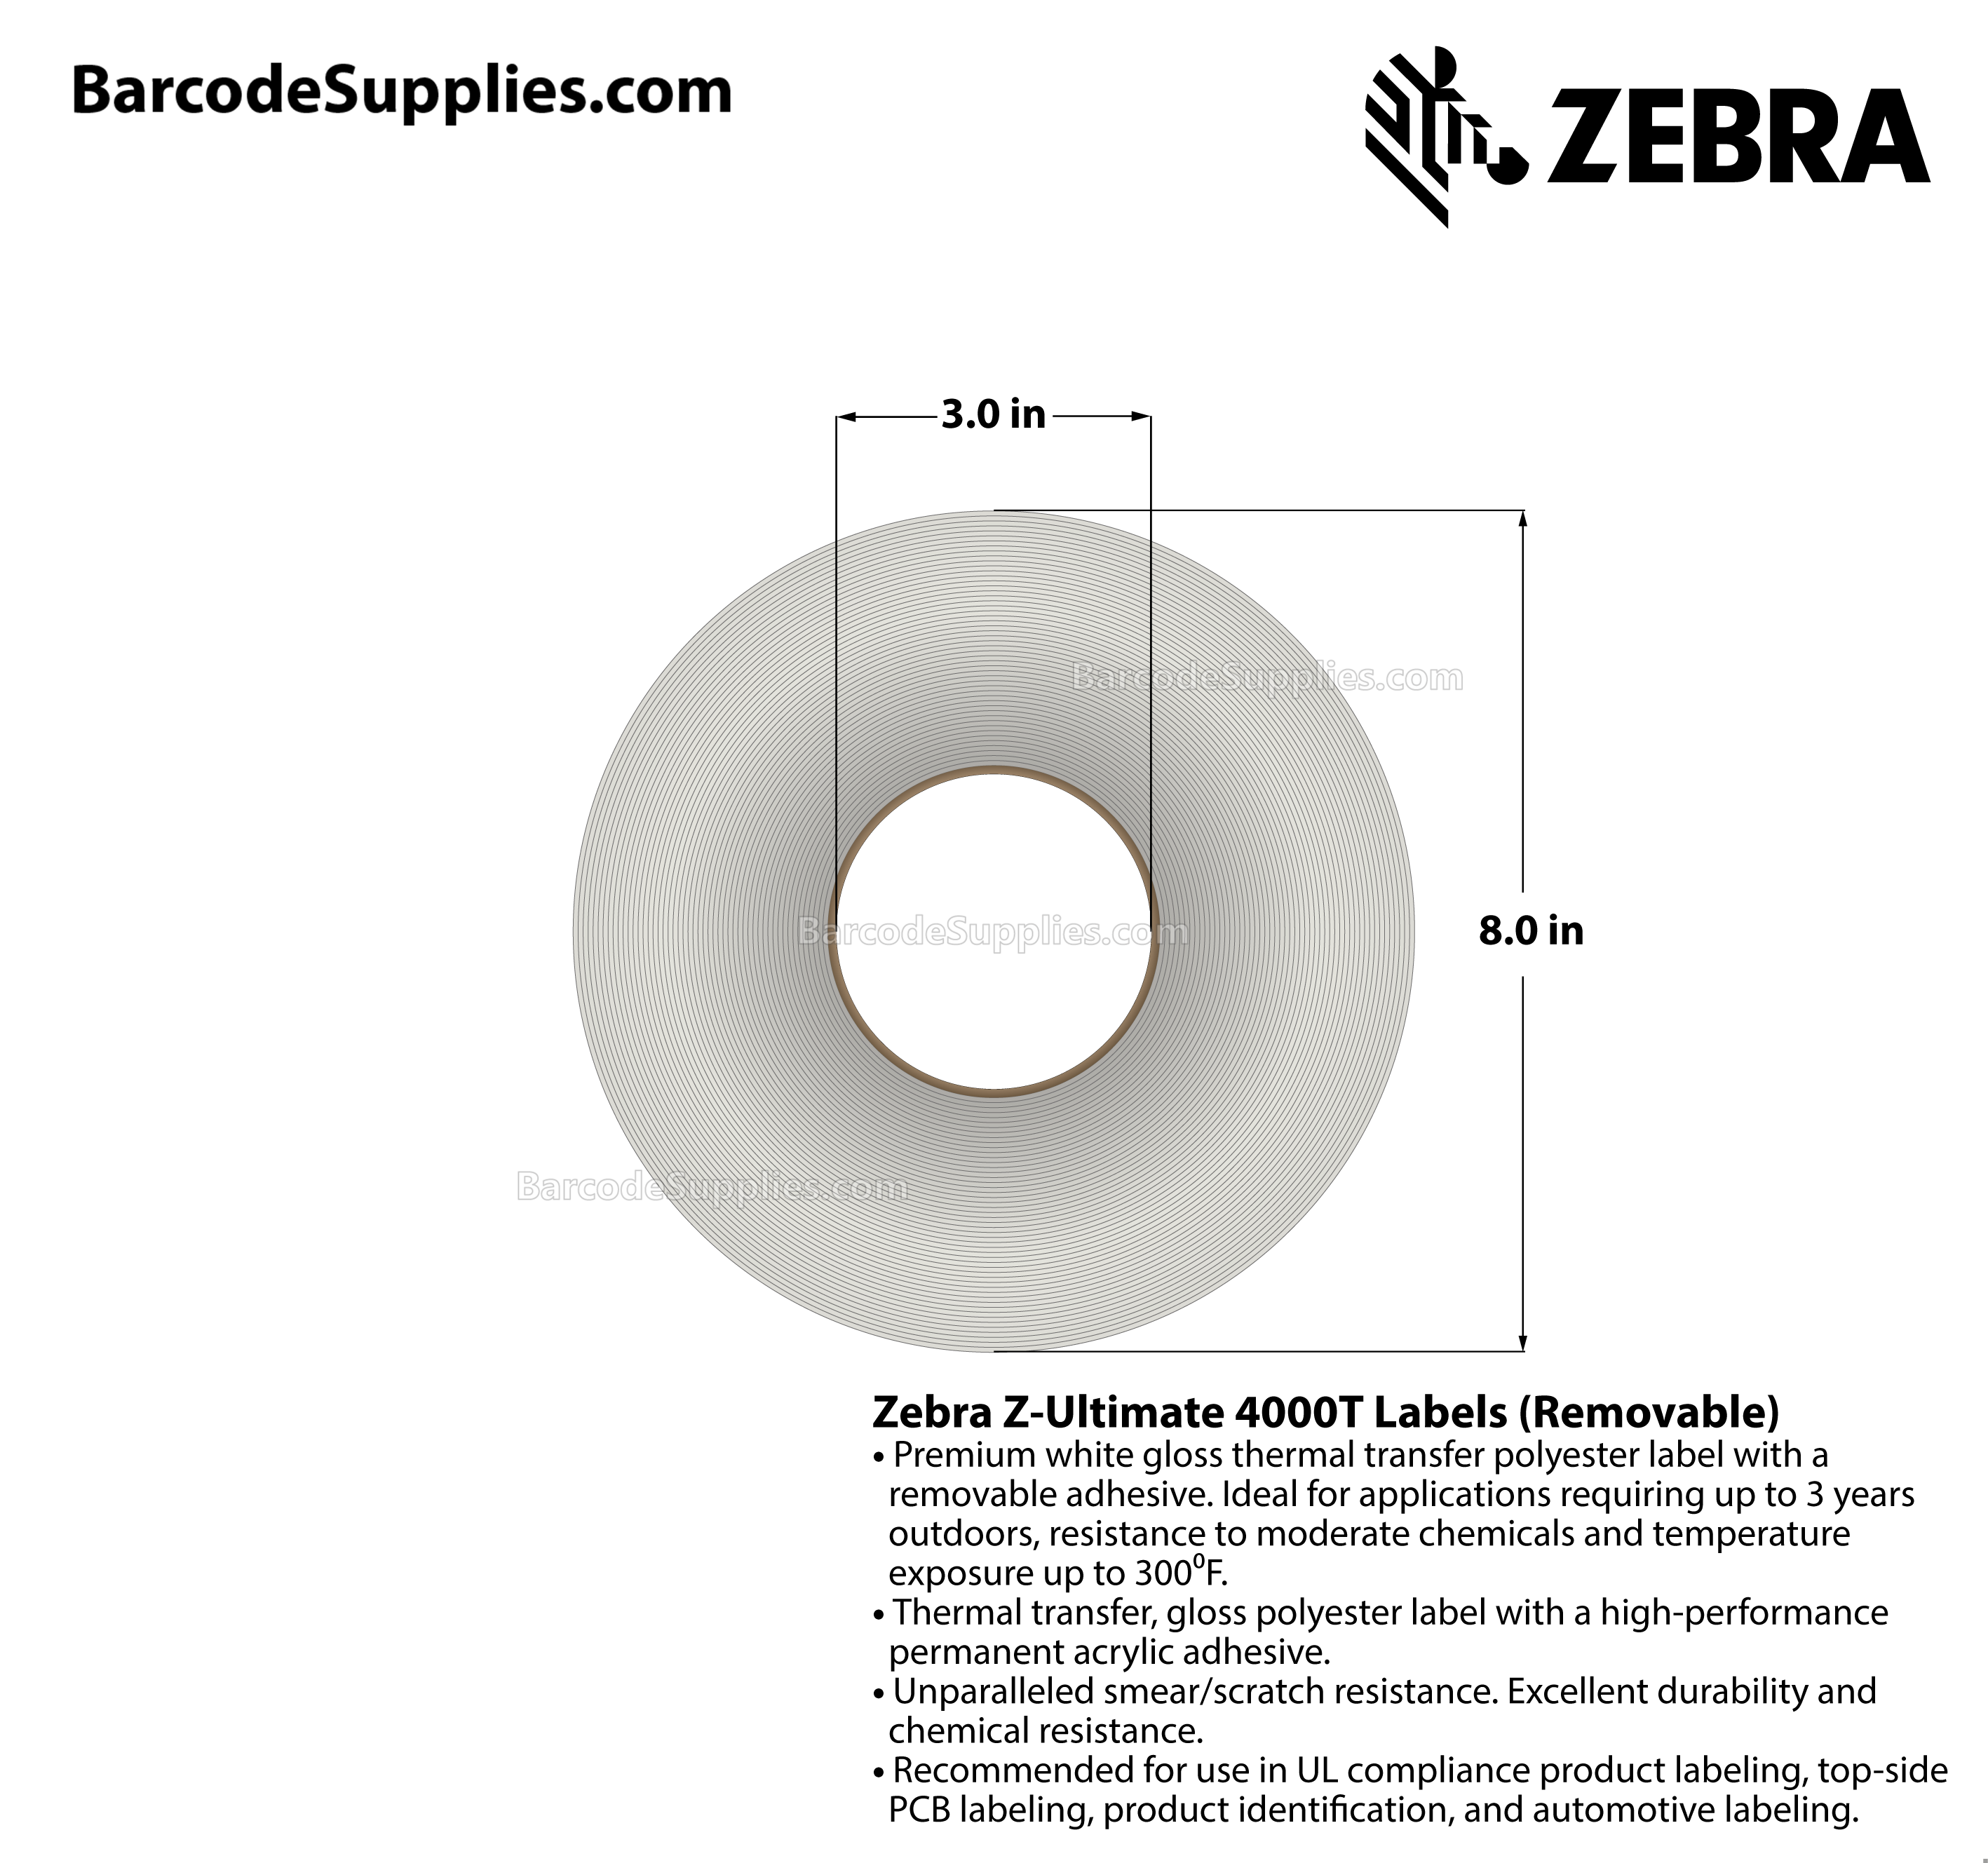 1 x 2 Thermal Transfer White Z-Ultimate 4000T Removable Labels With Removable Adhesive - Perforated - 3000 Labels Per Roll - Carton Of 1 Rolls - 3000 Labels Total - MPN: 10023149